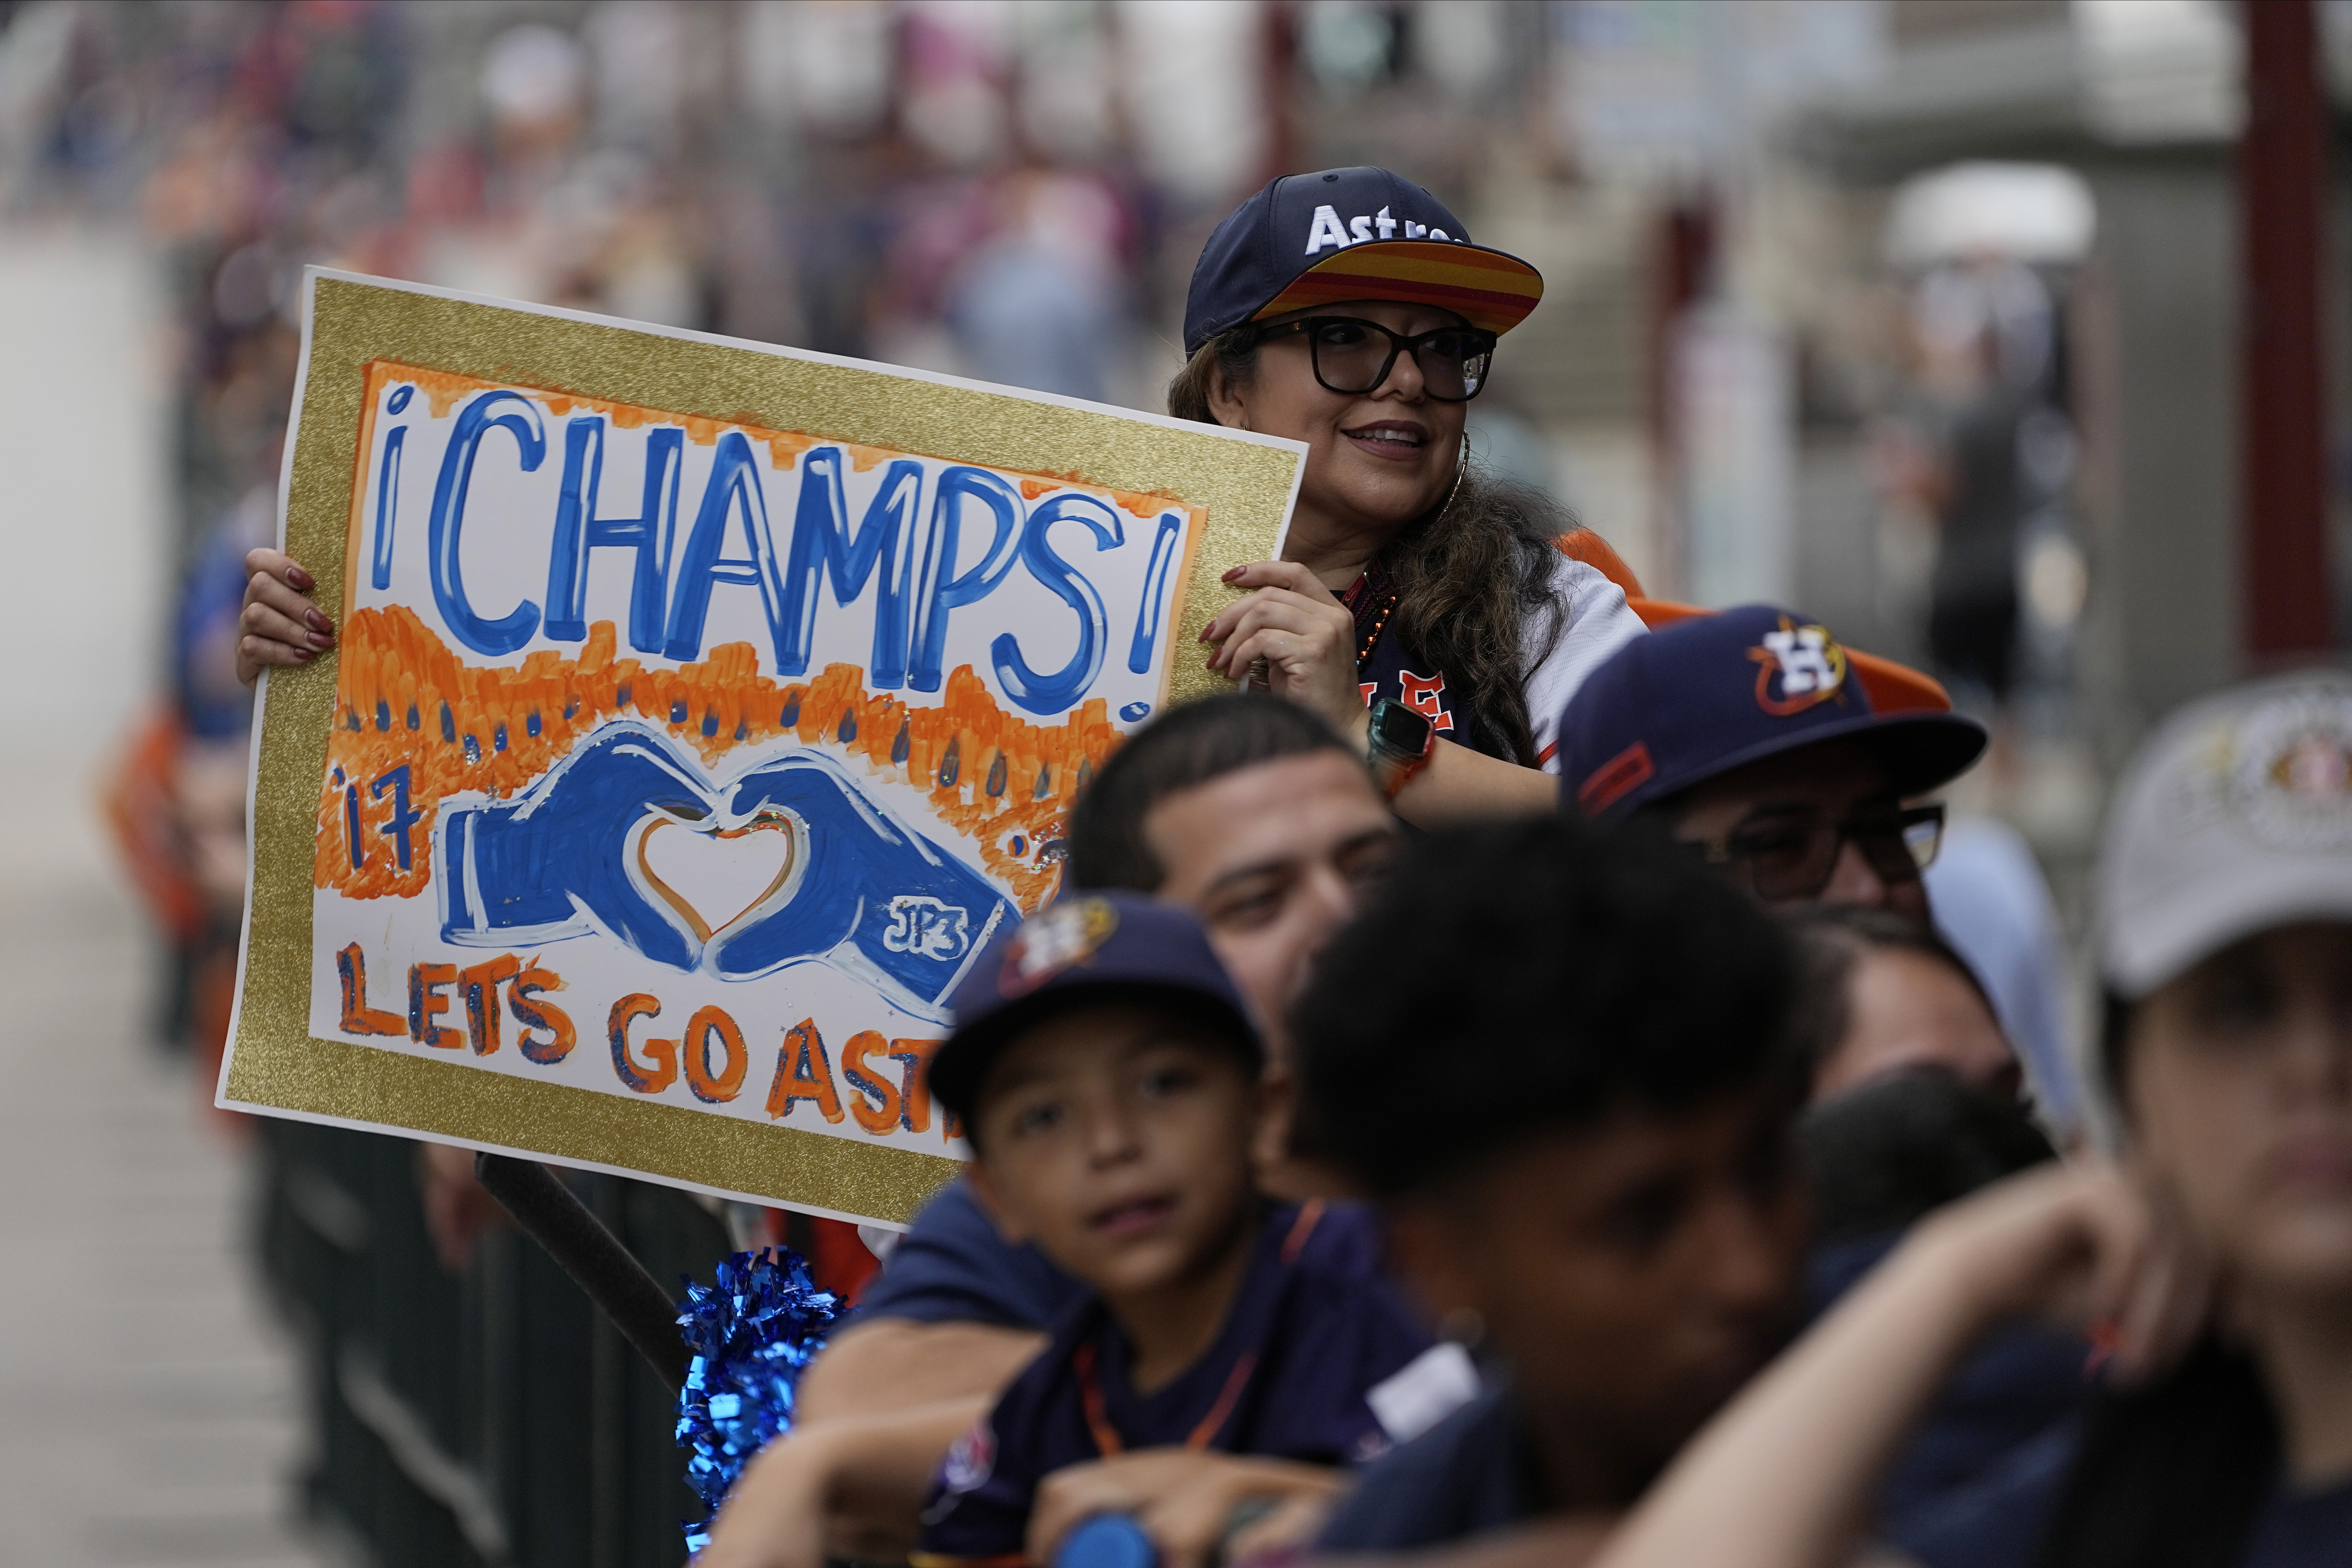 Meet the Astros fan already in line for the World Series victory parade